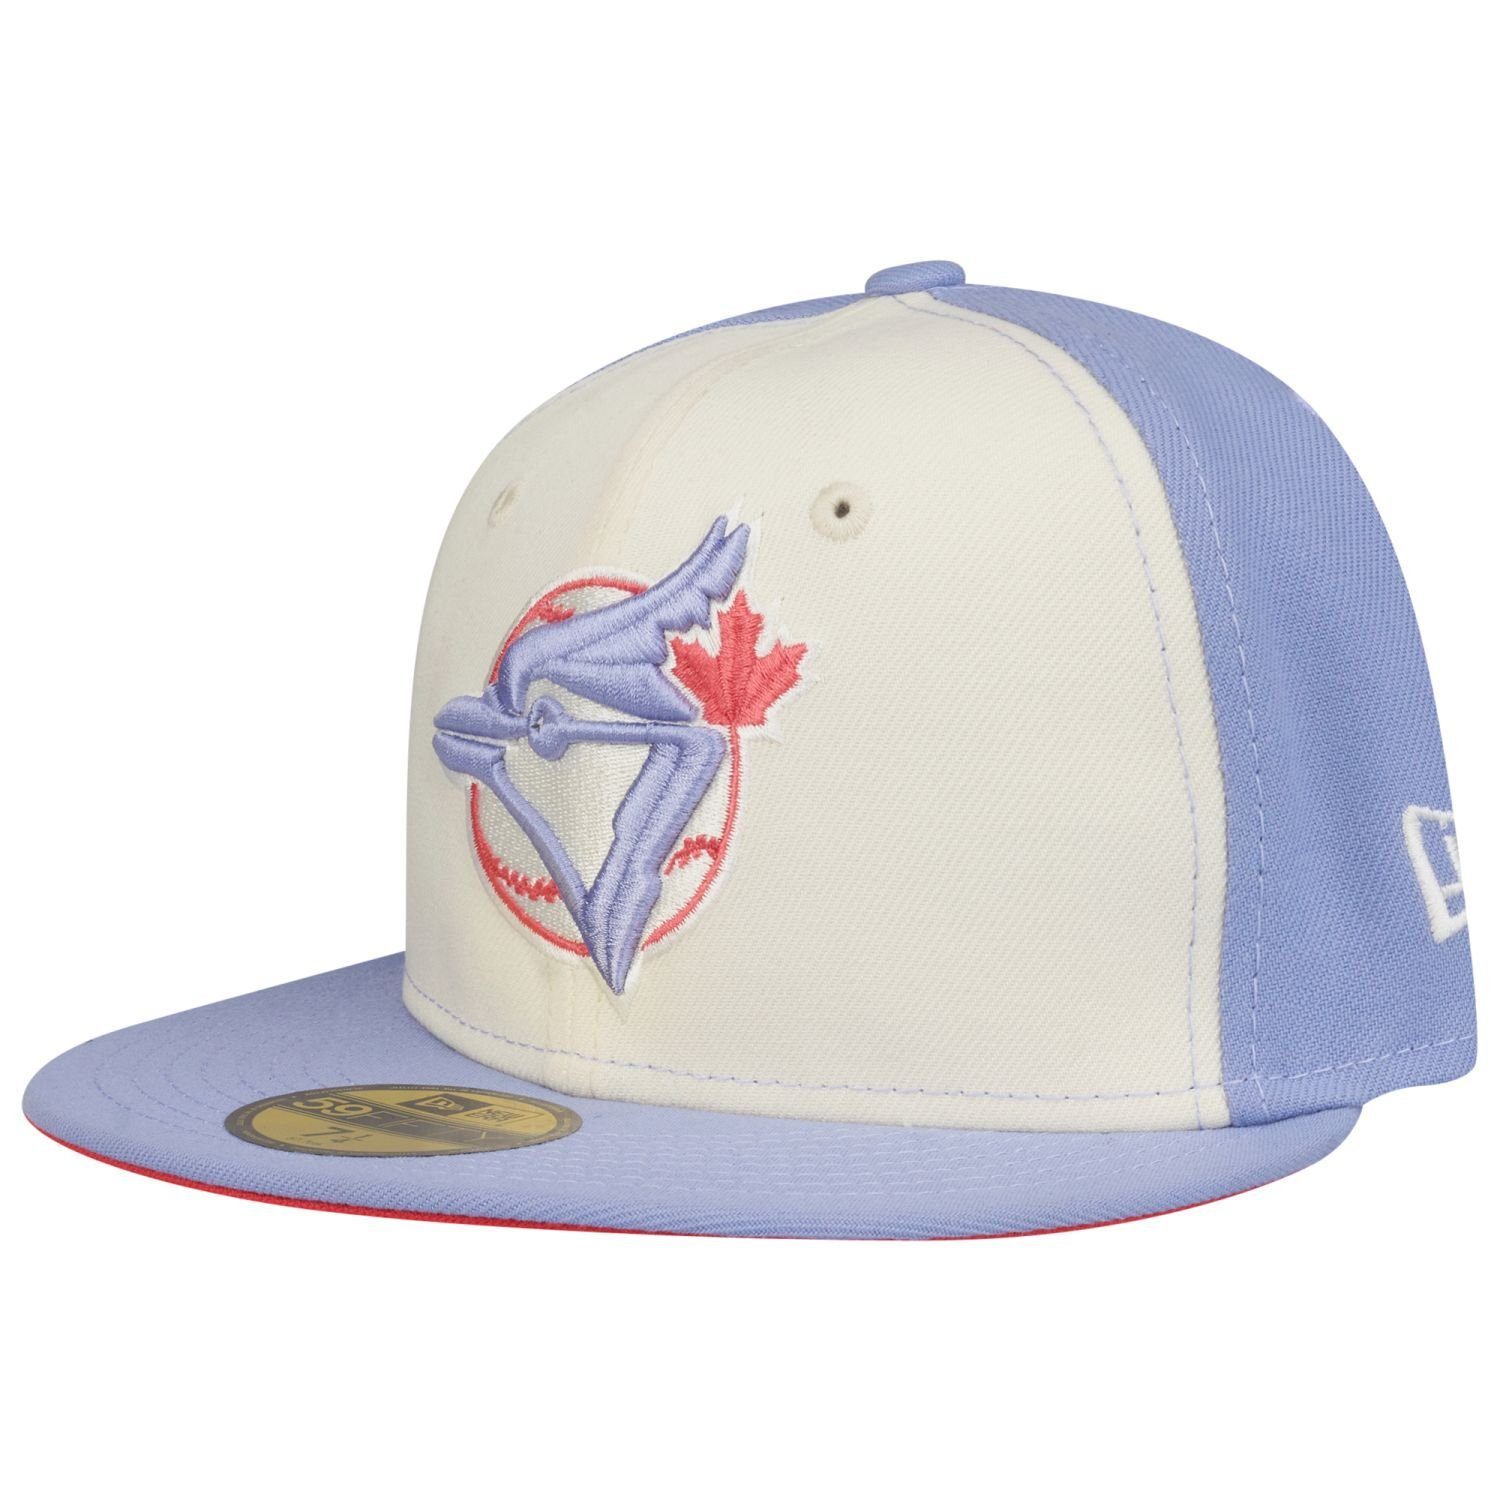 Jays COOPERSTOWN Toronto Era New Cap Fitted 59Fifty